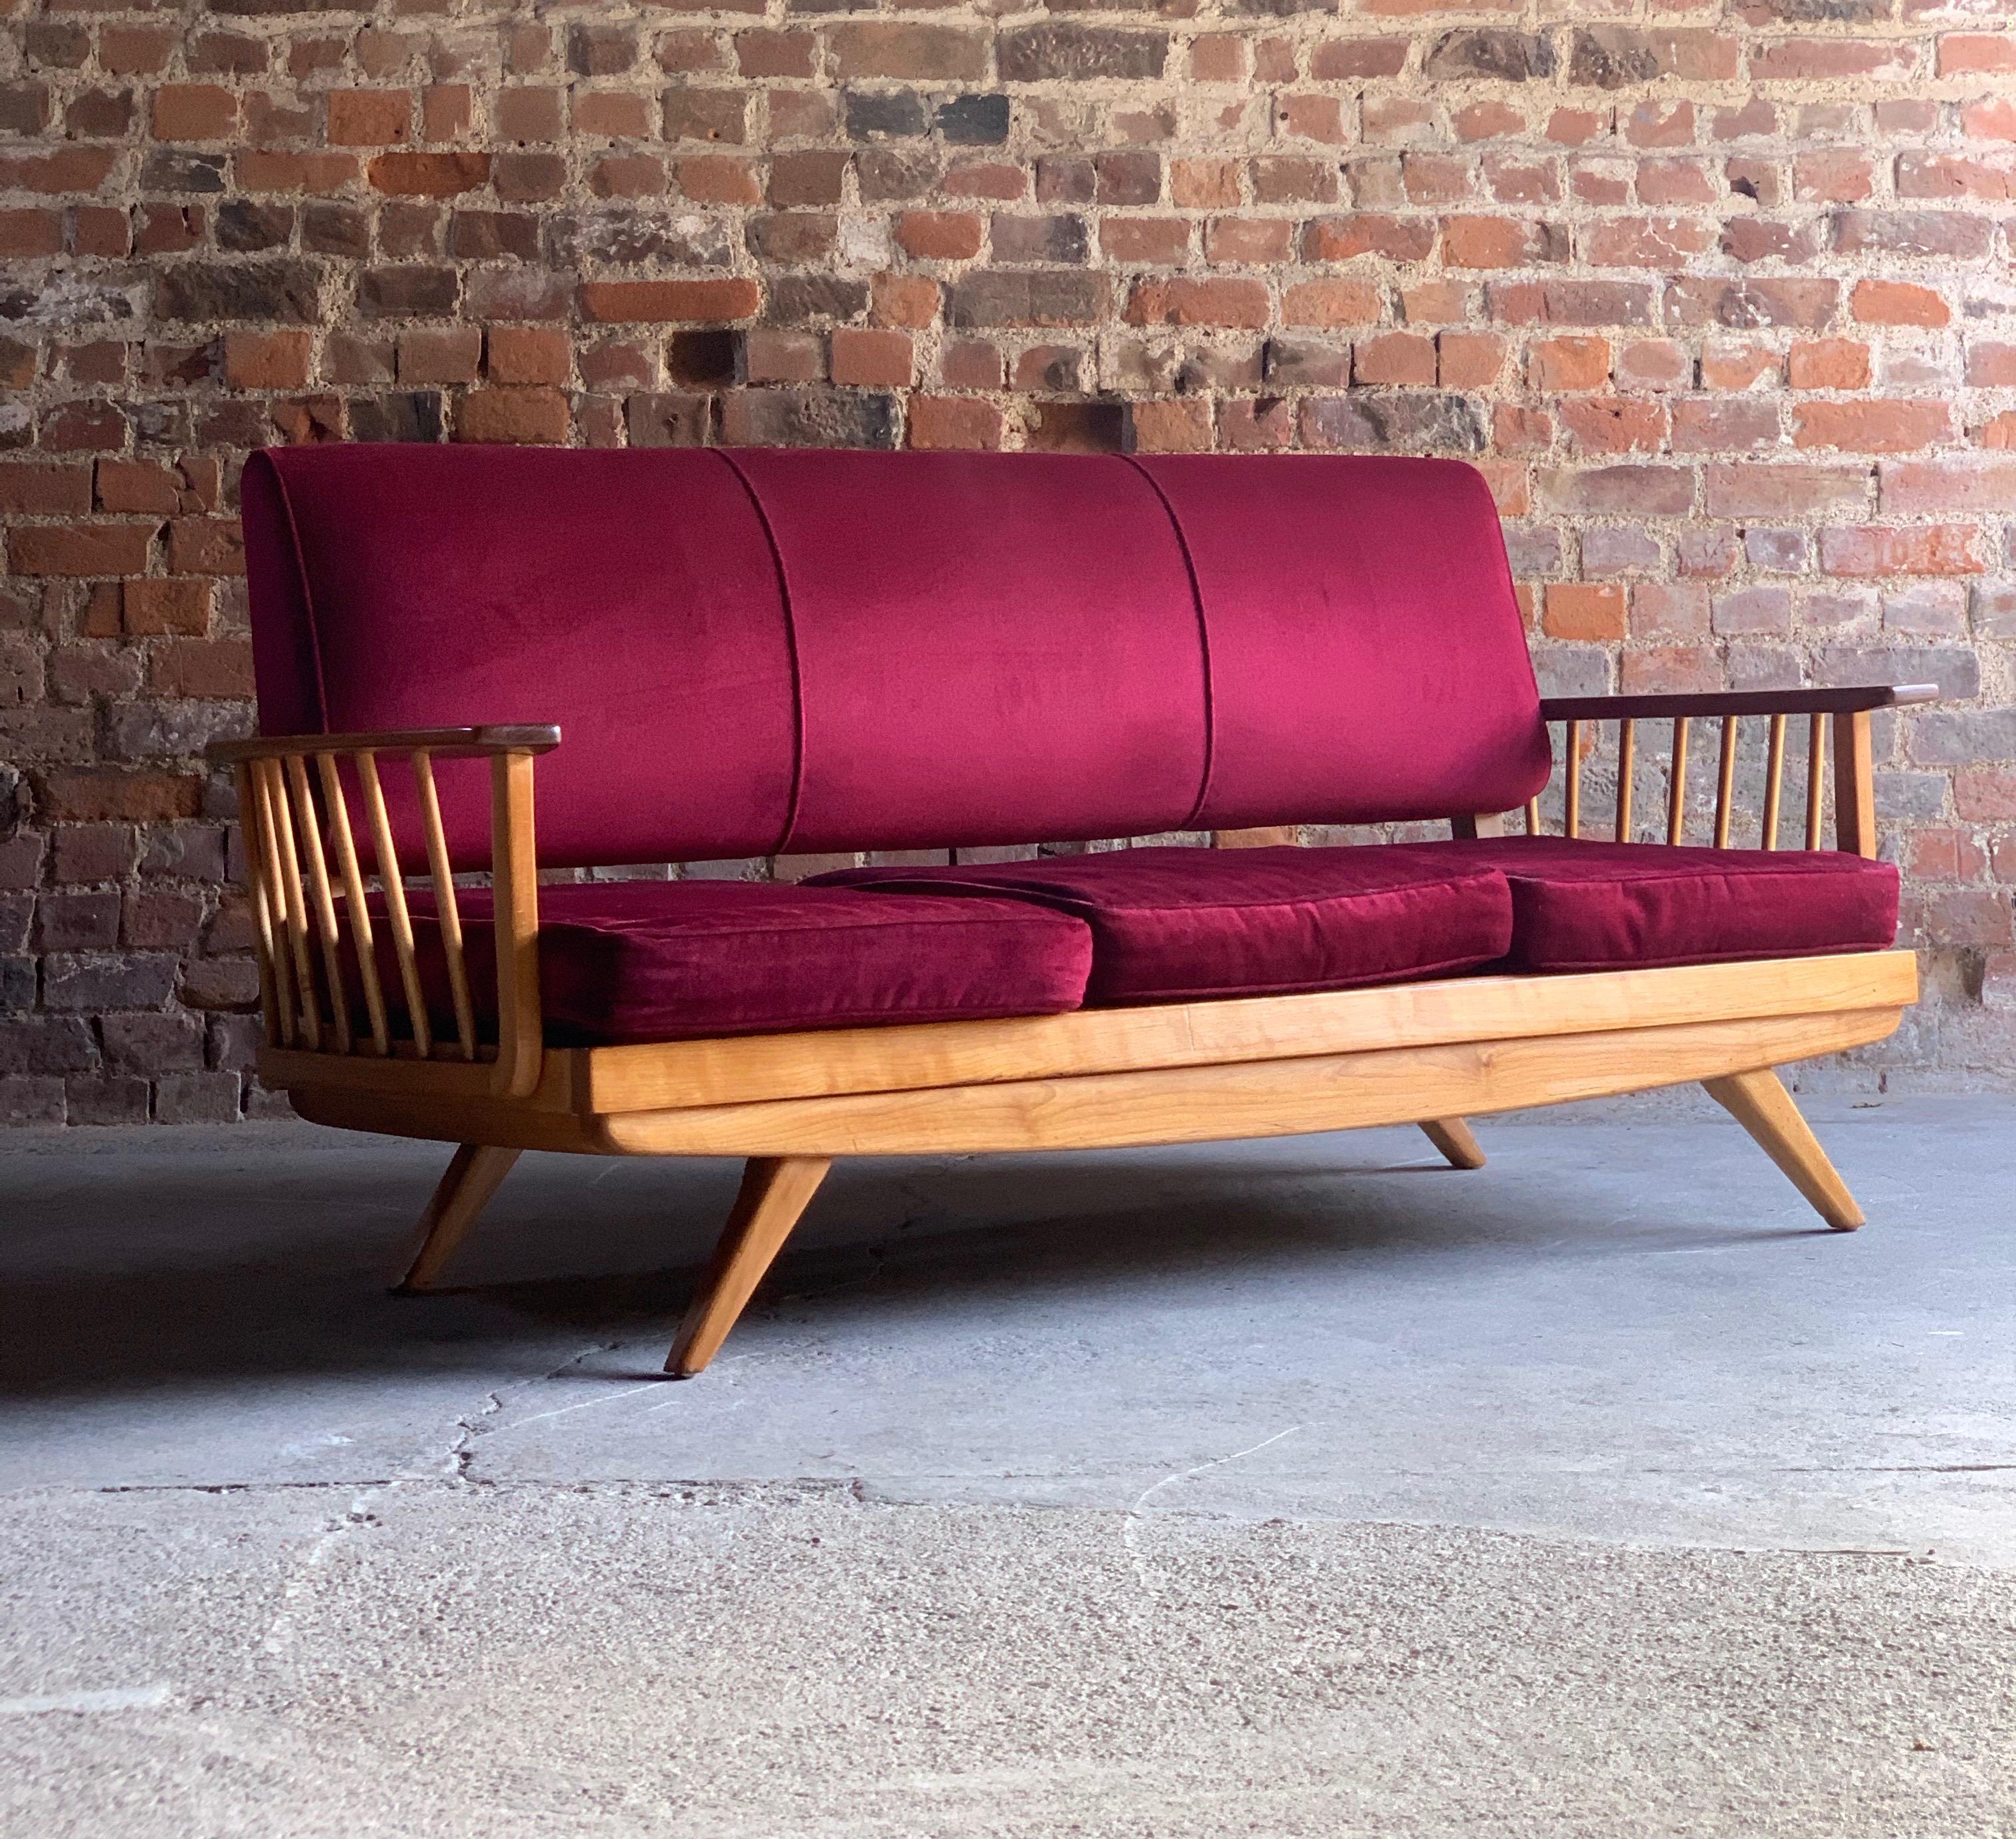 Mid-Century Modern elm sofa pair Danish, circa 1960s

Magnificent midcentury blonde elm sofa circa 1960, comprising of three seater sofa dressed in cranberry red velvet upholstery with spindle supports, raised on tapering legs, comes with matching